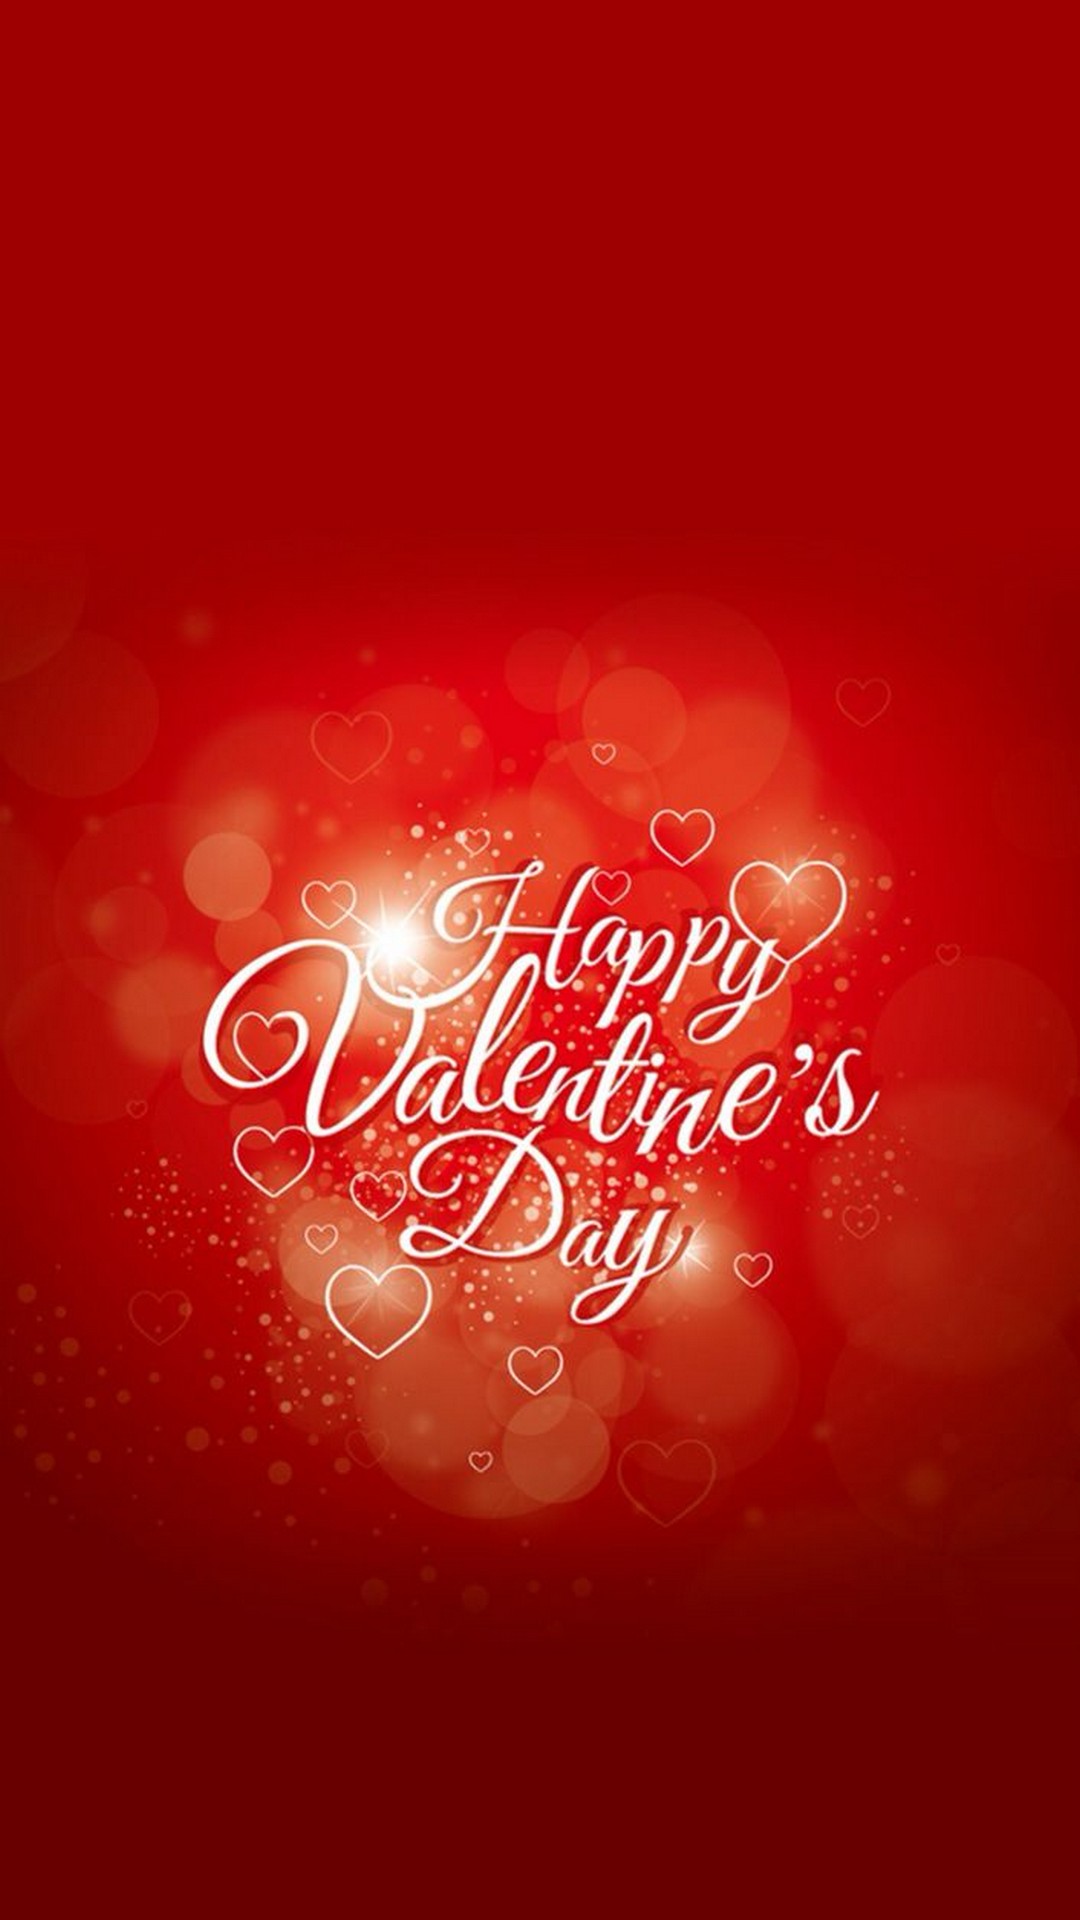 Android Wallpaper HD Happy Valentines Day Images with HD resolution 1080x1920